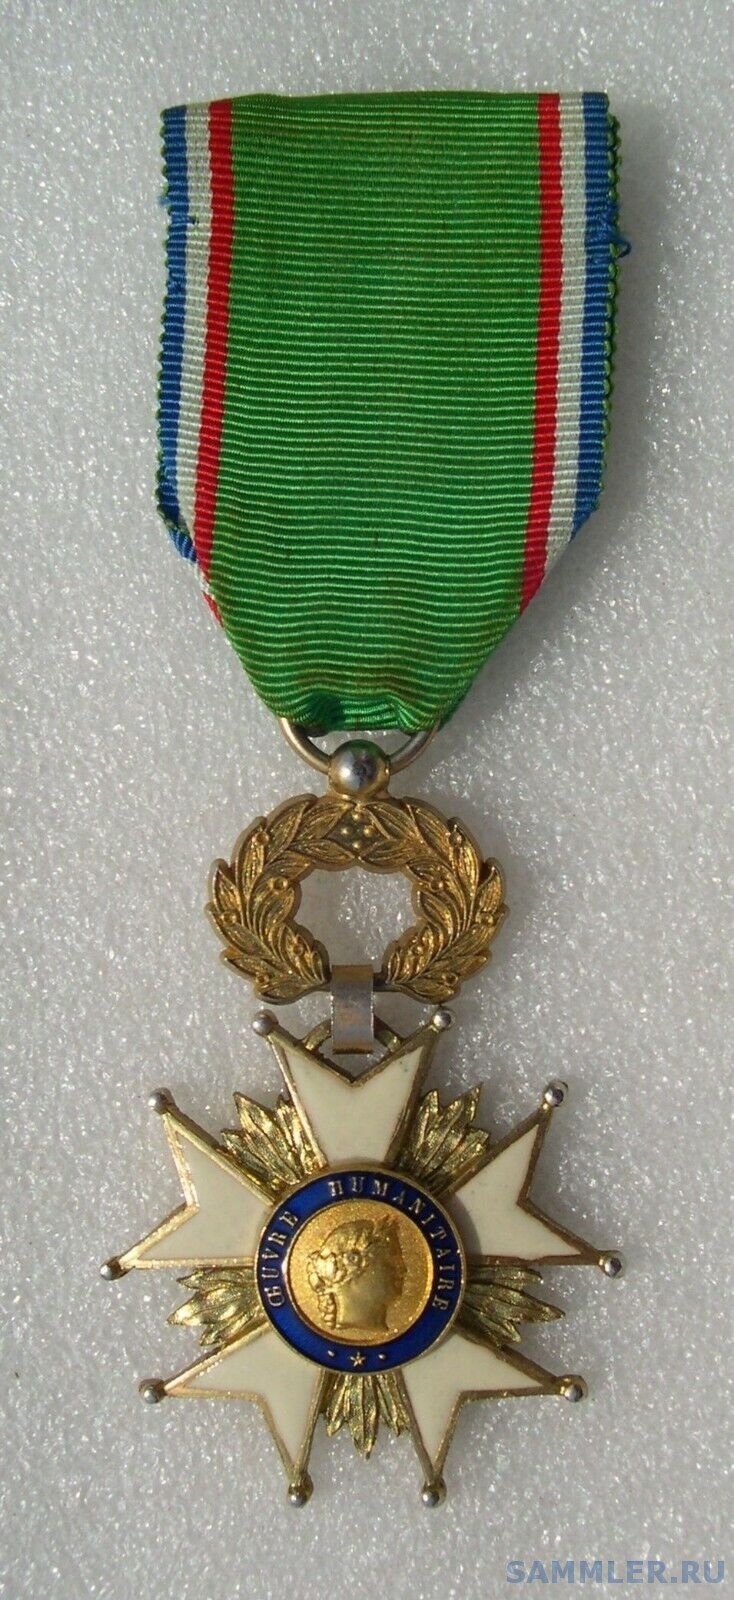 Medaille-Oeuvre-Humanitaire.jpg